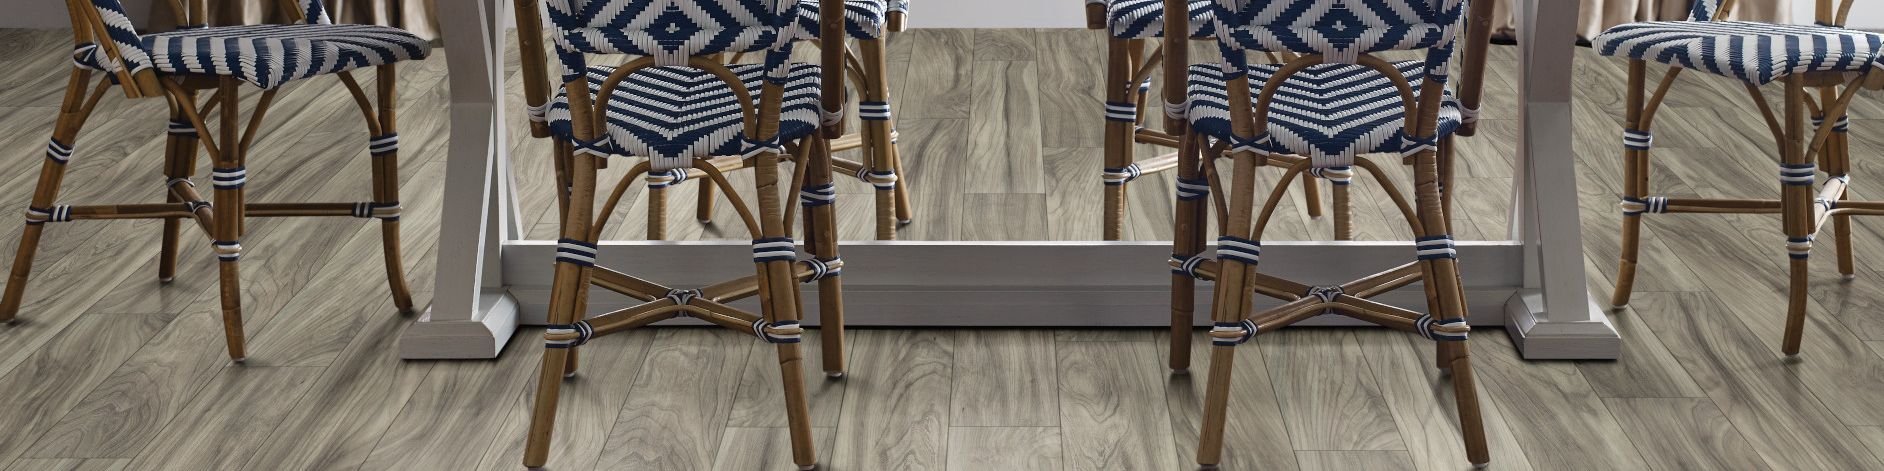 woven dining chairs around a dining table - Horrigan Flooring Center in Westminster